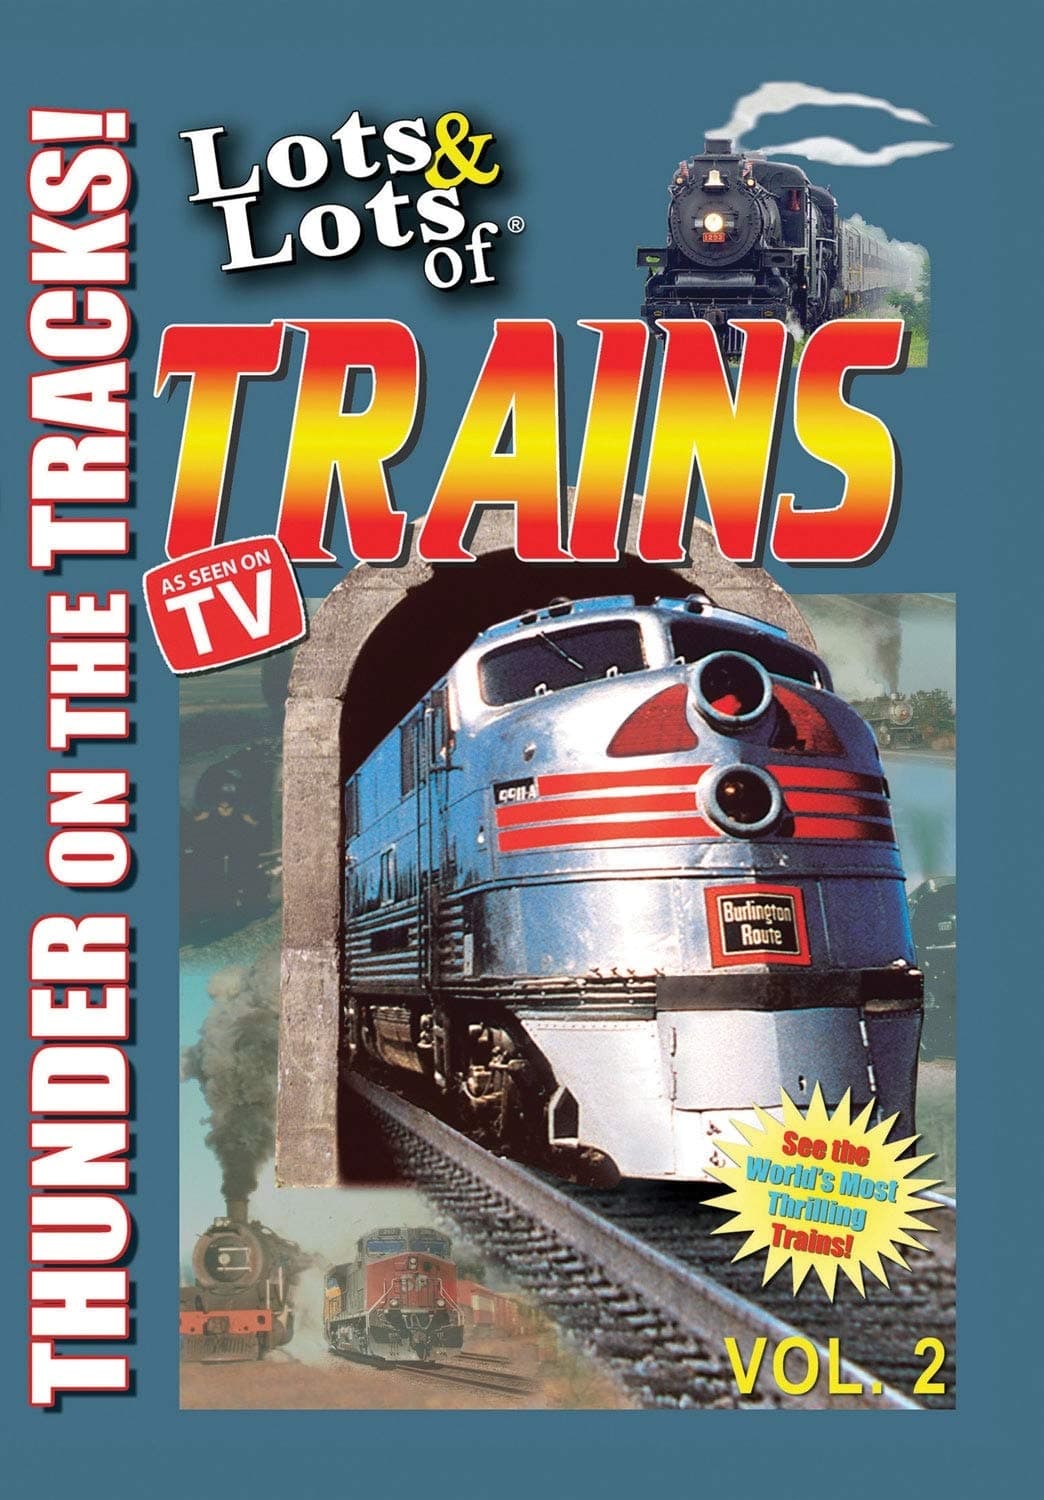 Lots & Lots of TRAINS, Vol 2 - Thunder on the Tracks!